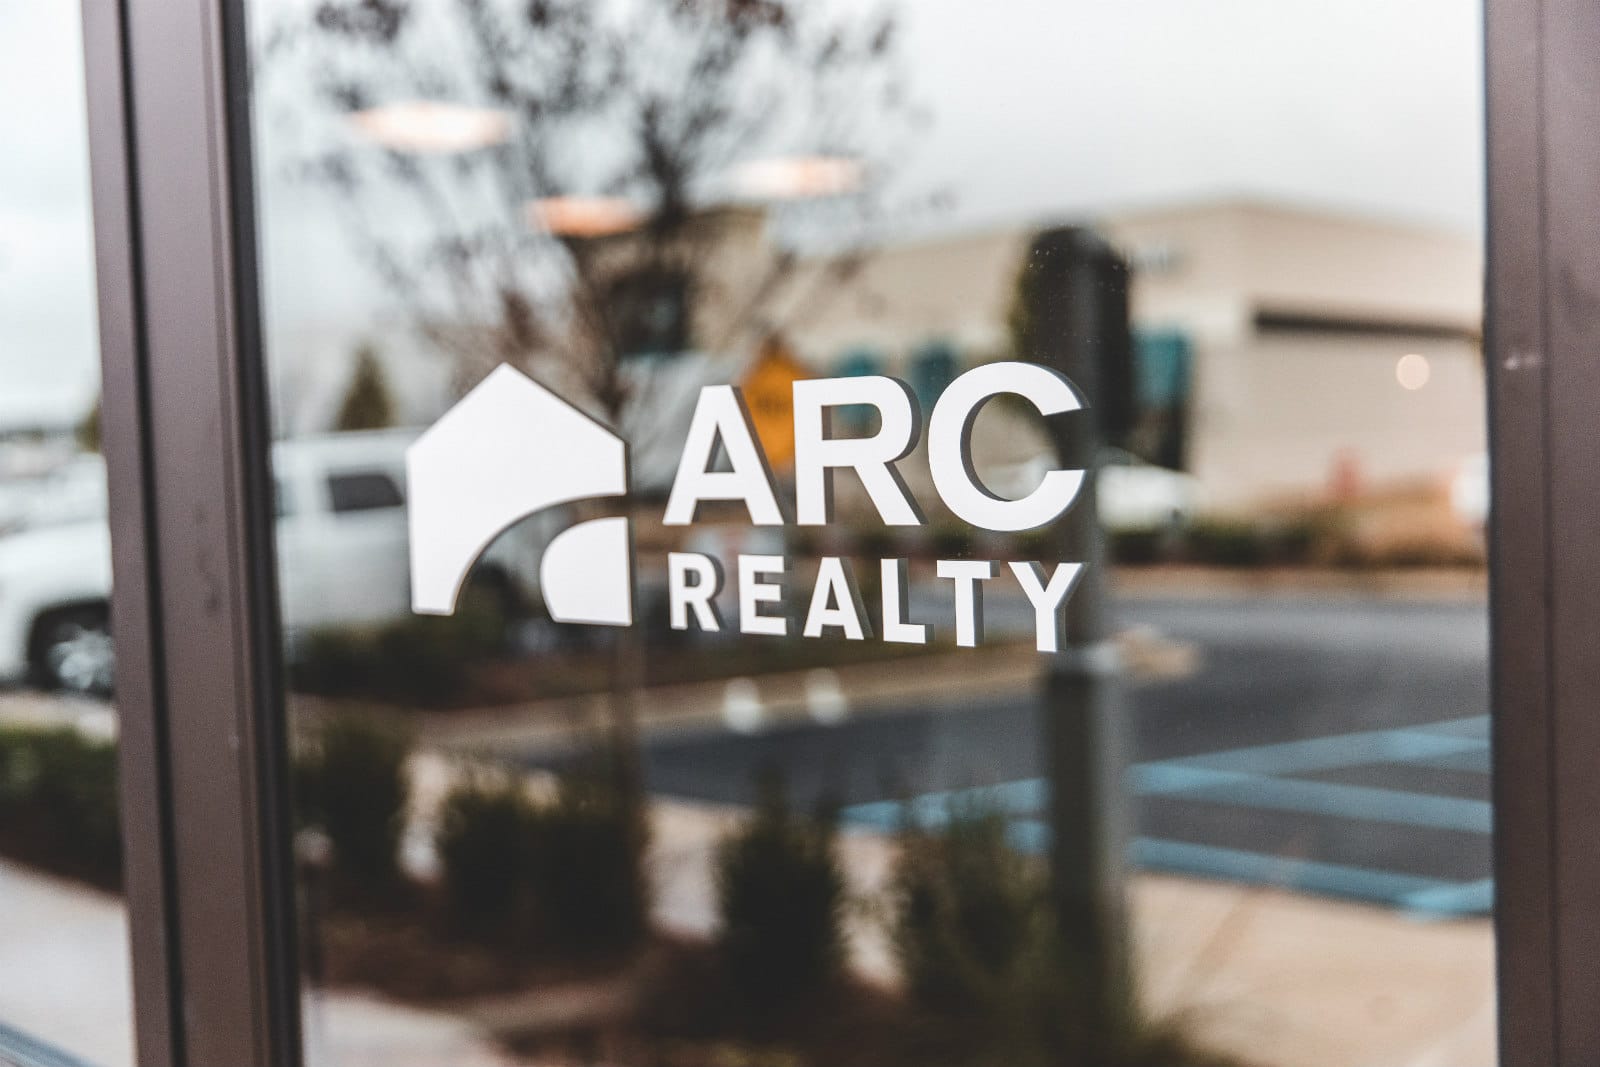 ARC Realty Hoover is in Stadium Trace Village